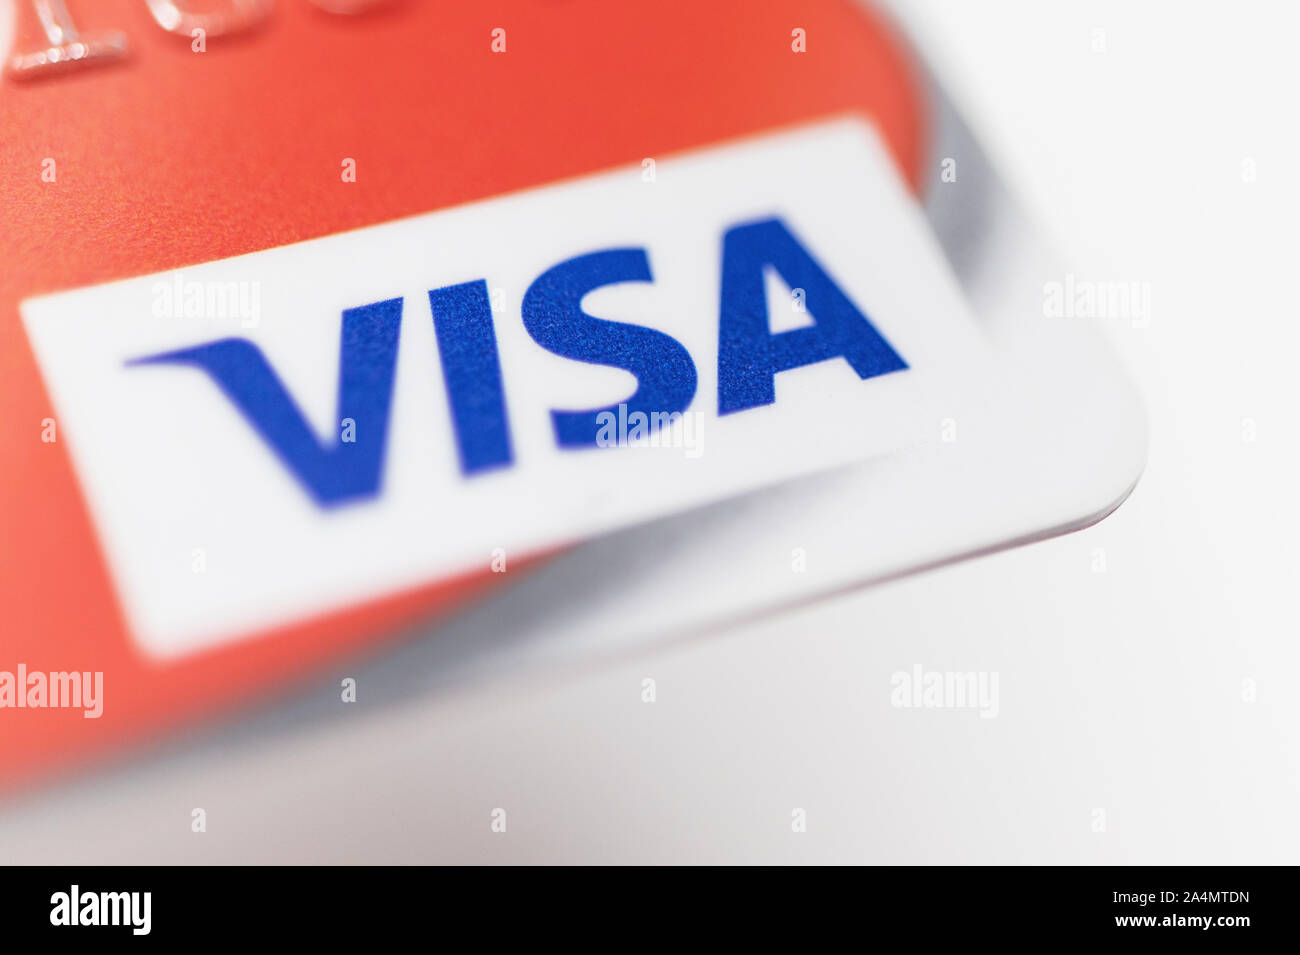 London / UK - October 9th 2019 - VISA logo on red bank card, closeup macro view with a shallow depth of field Stock Photo